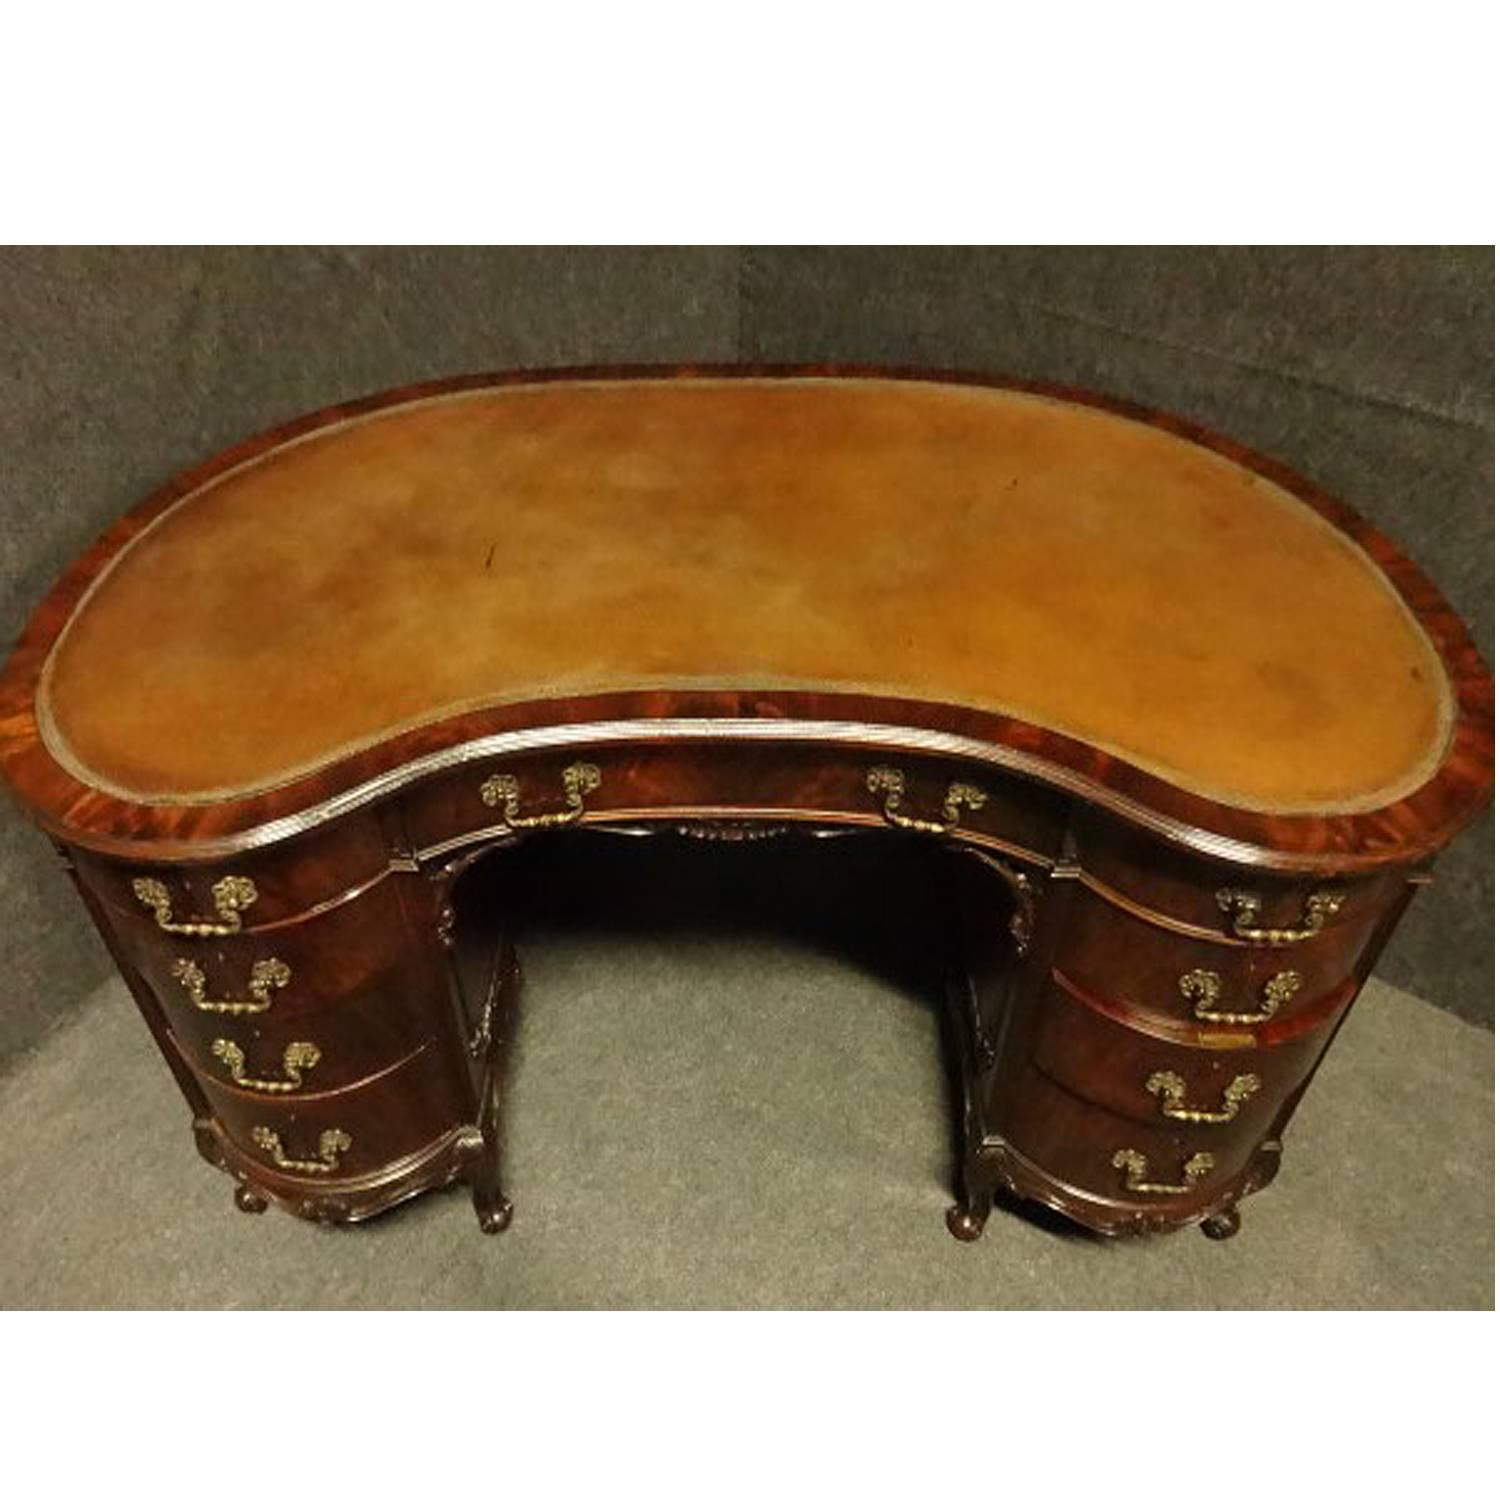 A top quality English mahogany kidney shaped kneehole desk in the Chippendale style, all solid mahogany including drawer linings, top quality locks and handles with the key, original hide skiver, excellent colour and in excellent original condition.